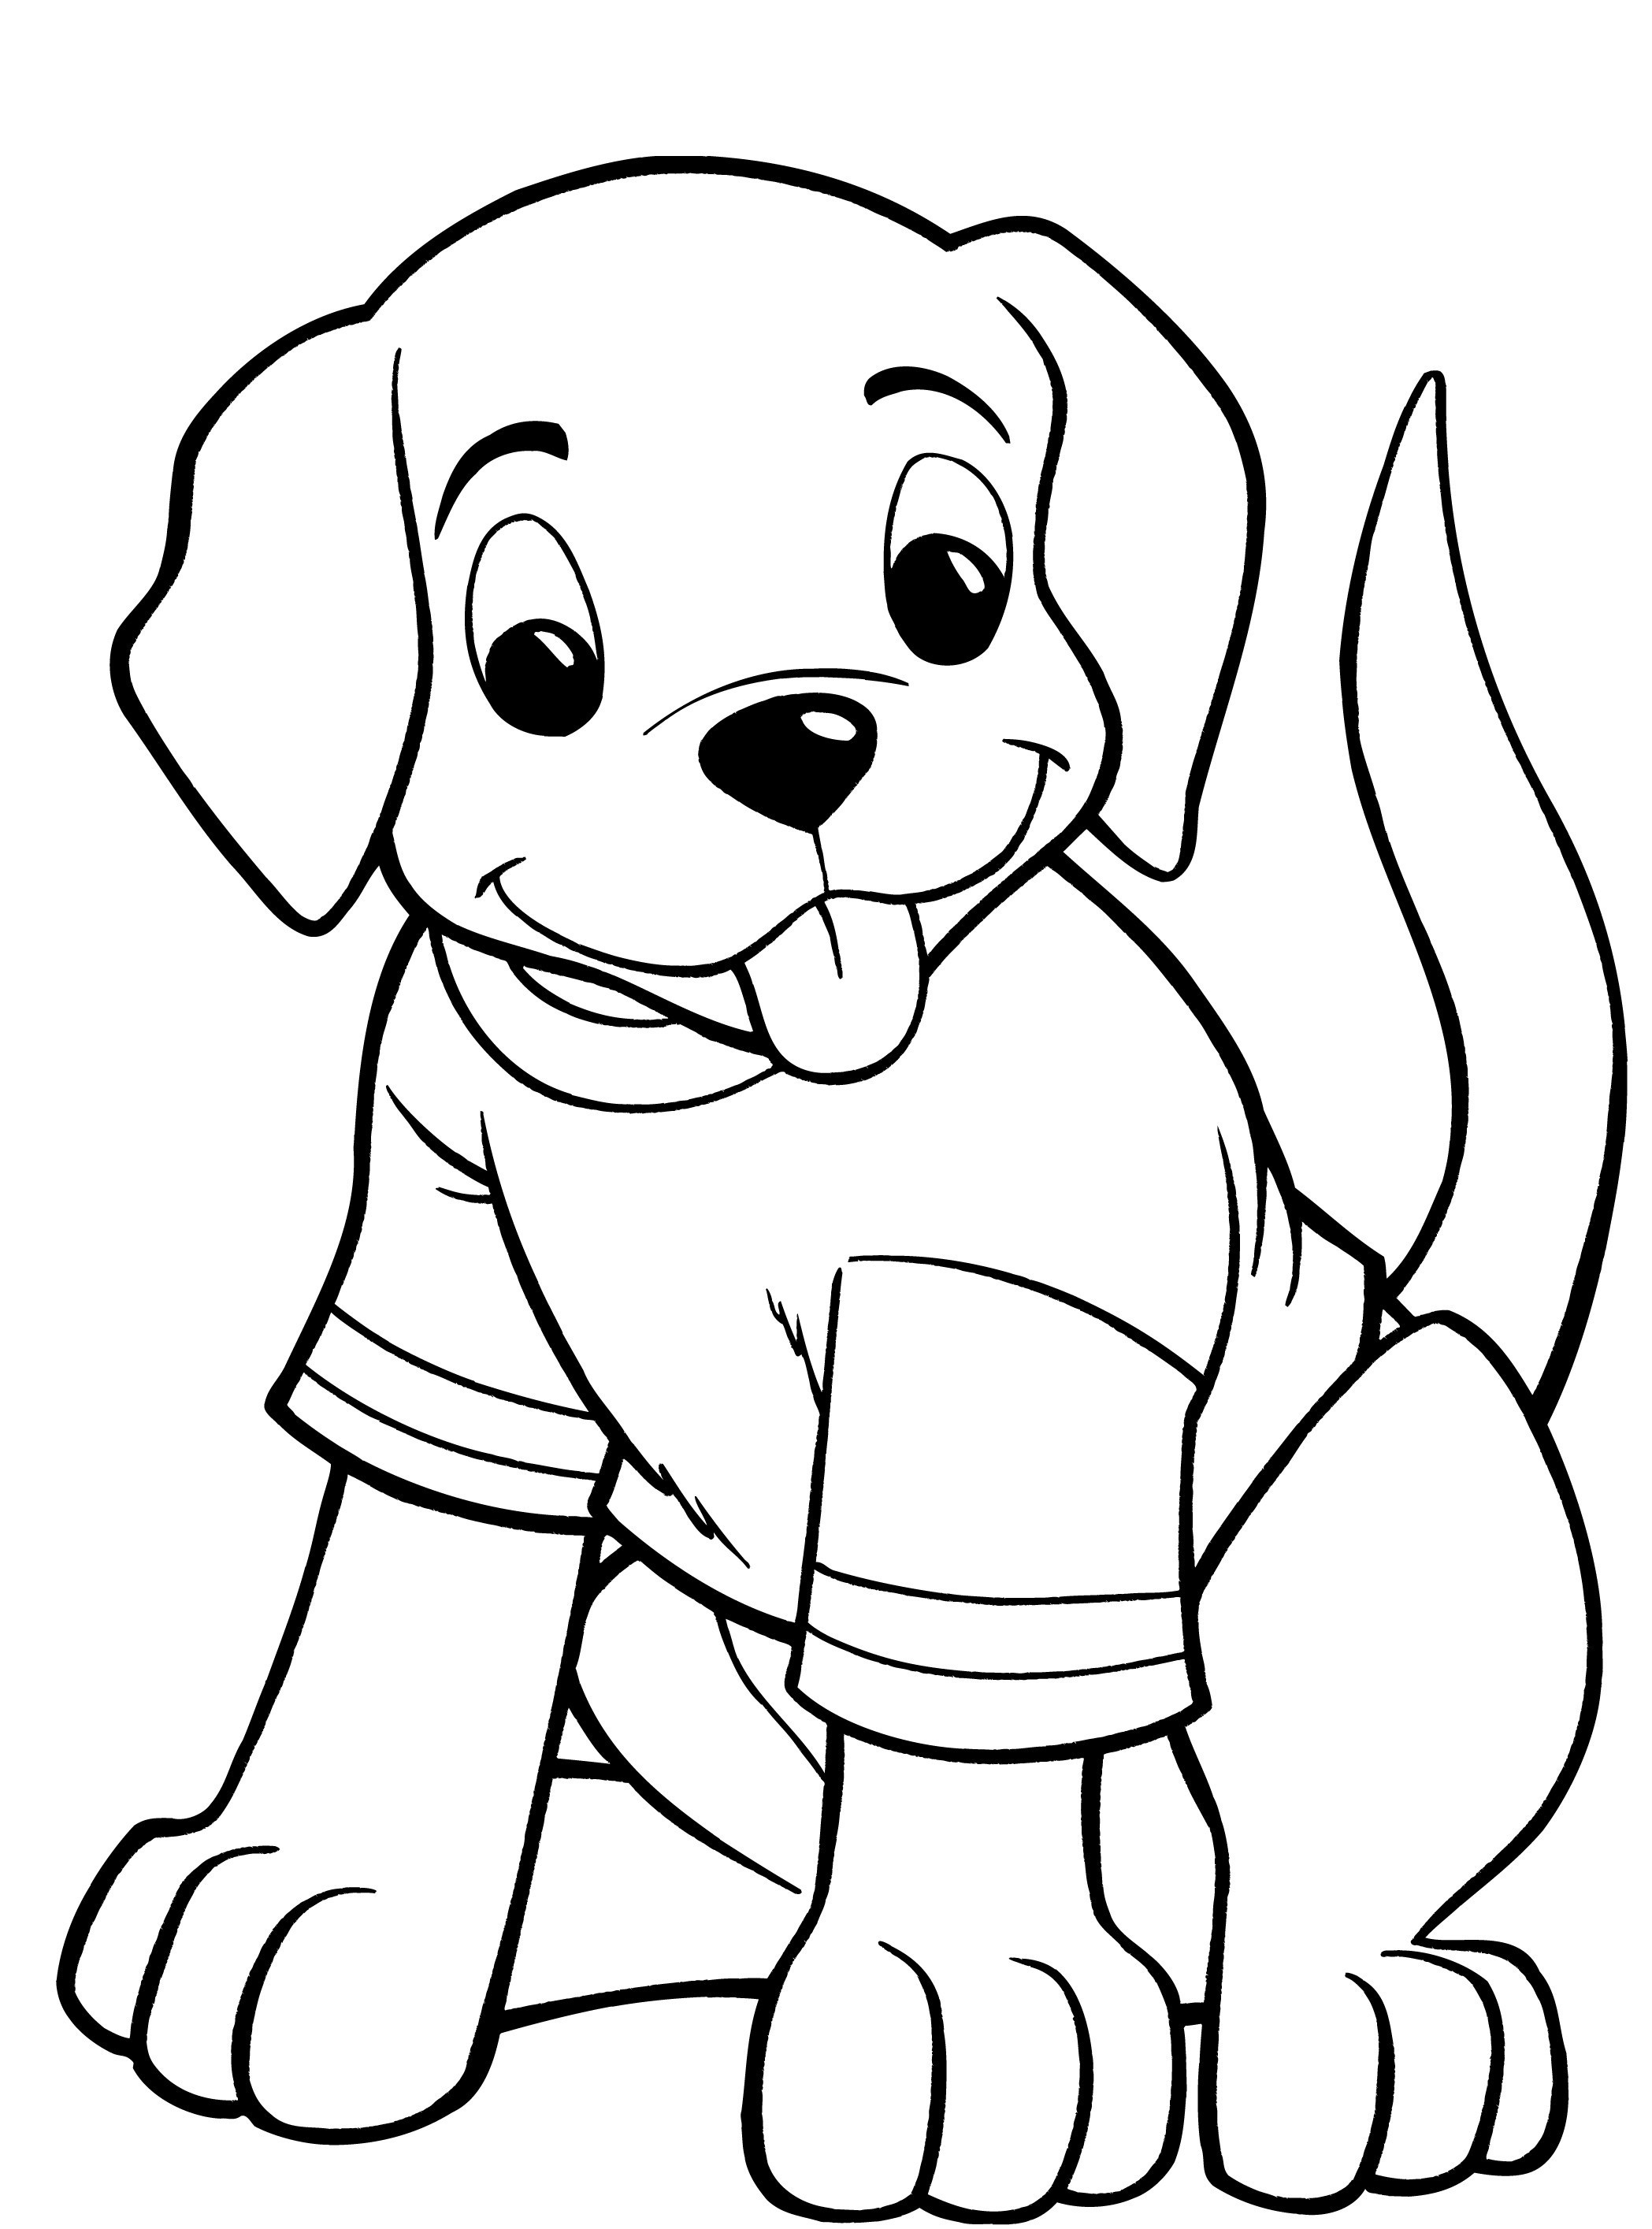 Puppy Coloring Pages For Kids
 Dog Coloring Pages For Kids Preschool and Kindergarten